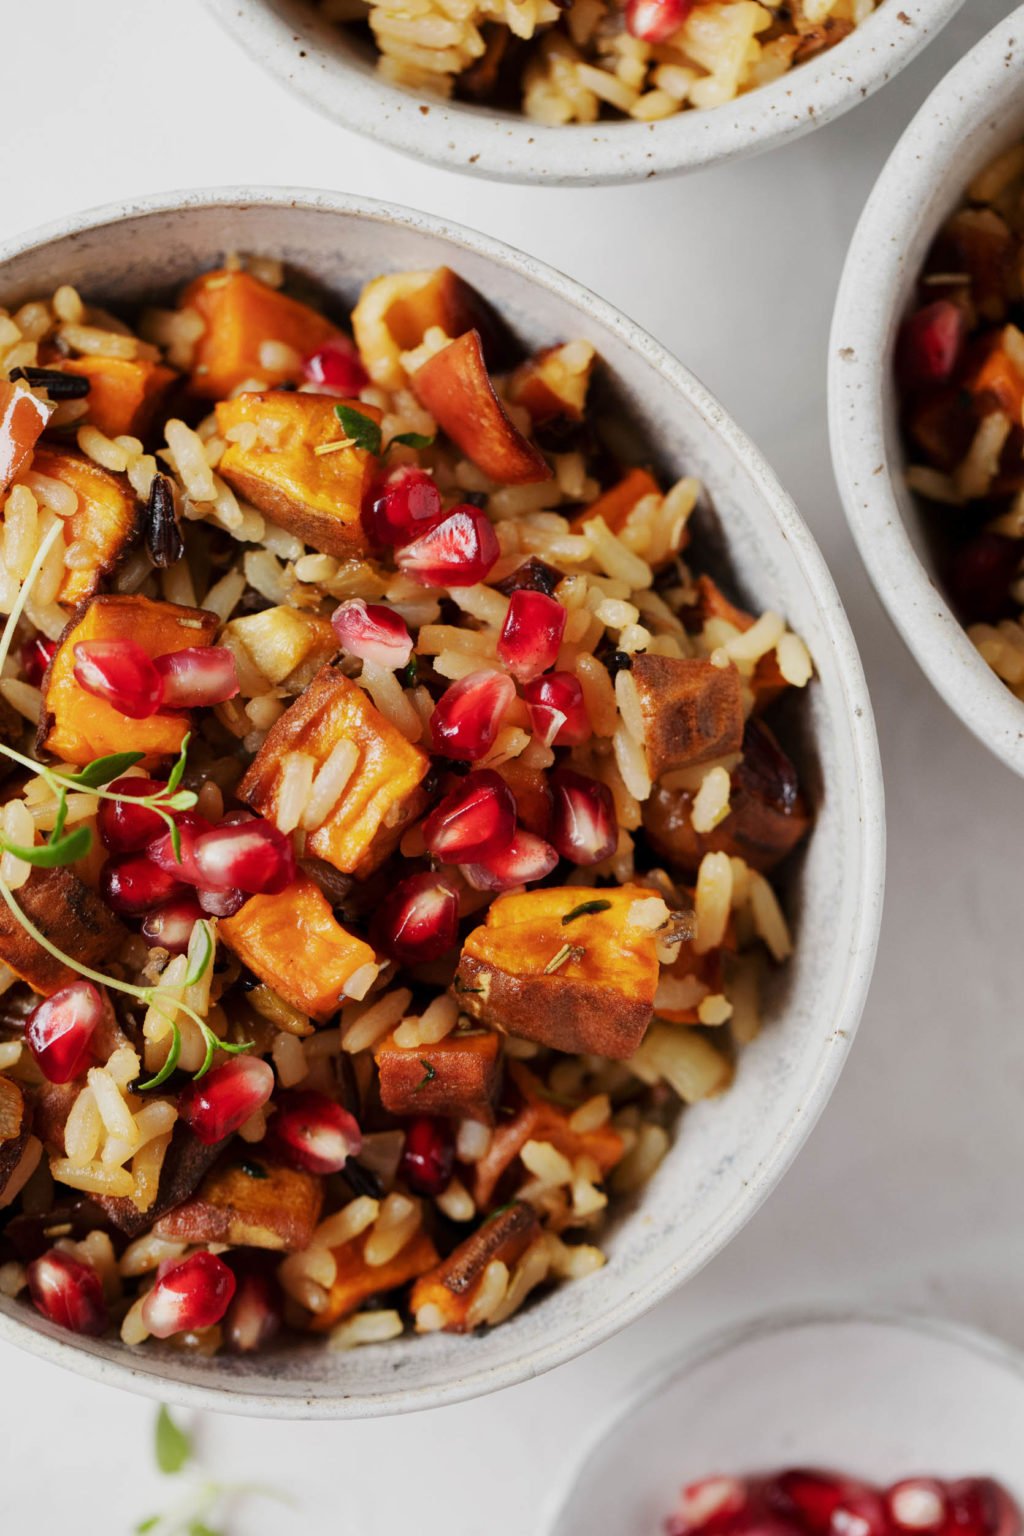 A close up, overhead image of a colorful bowl of wild rice, pomegranate seeds, roasted sweet potatoes, and apples.